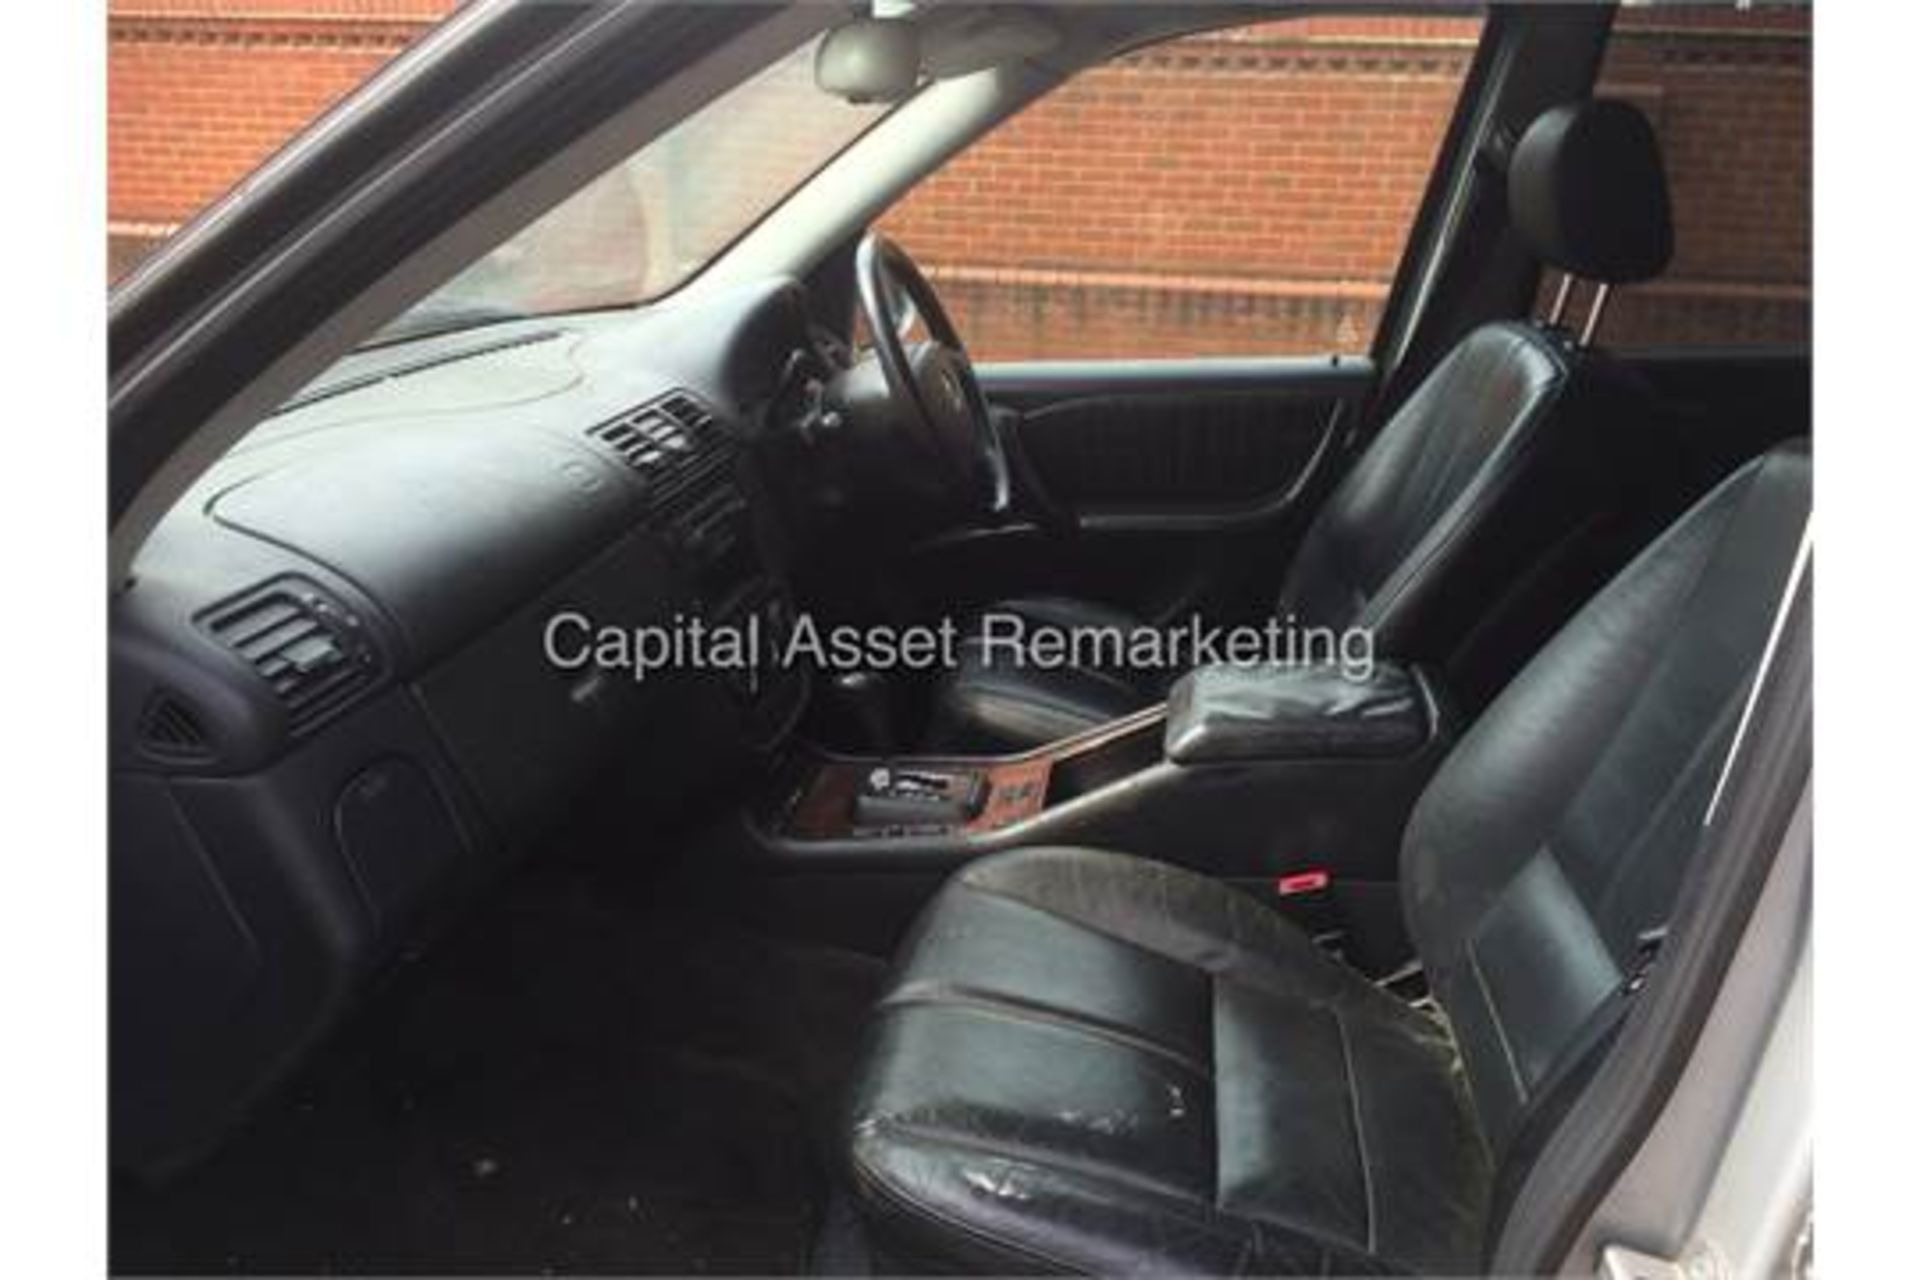 (On Sale) MERCEDES ML 320 (2003 MODEL) **7 SEATER MODEL** 'AUTO - LEATHER - TOP SPEC' (NO VAT) - Image 7 of 13